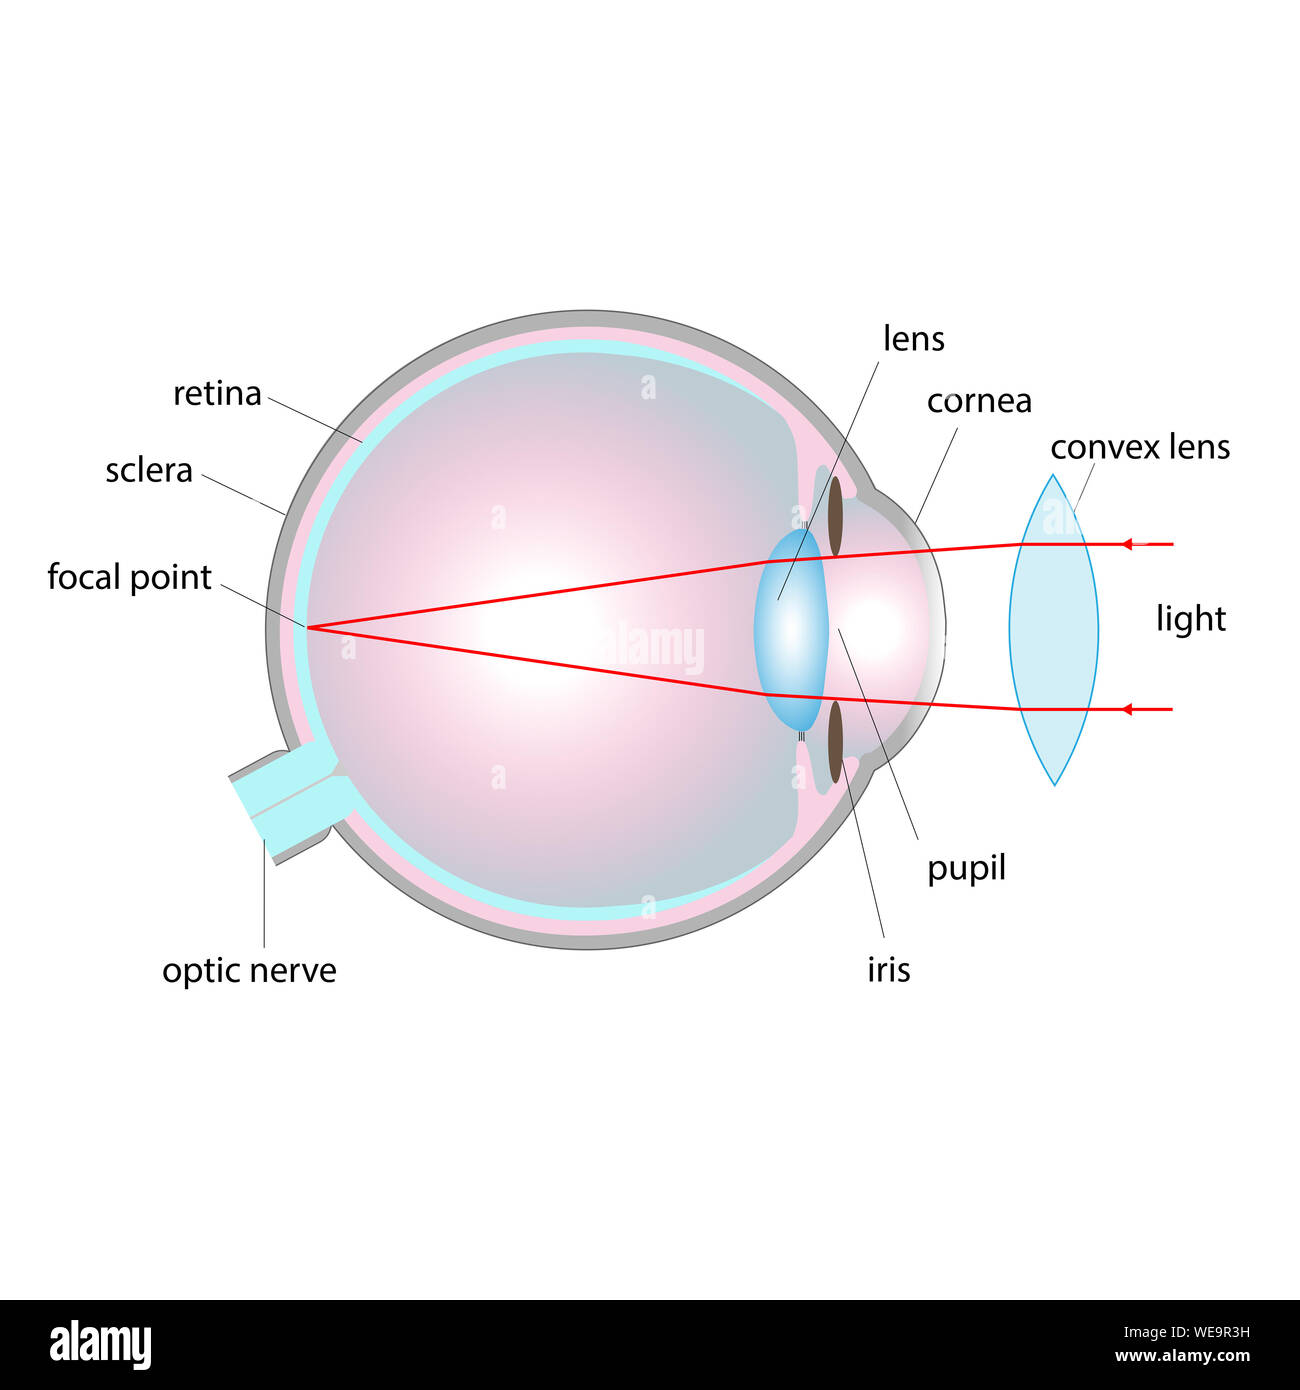 Vision disorder, illustration. Long-sightedness (hyperopia) corrected with a convex lens. Stock Photo